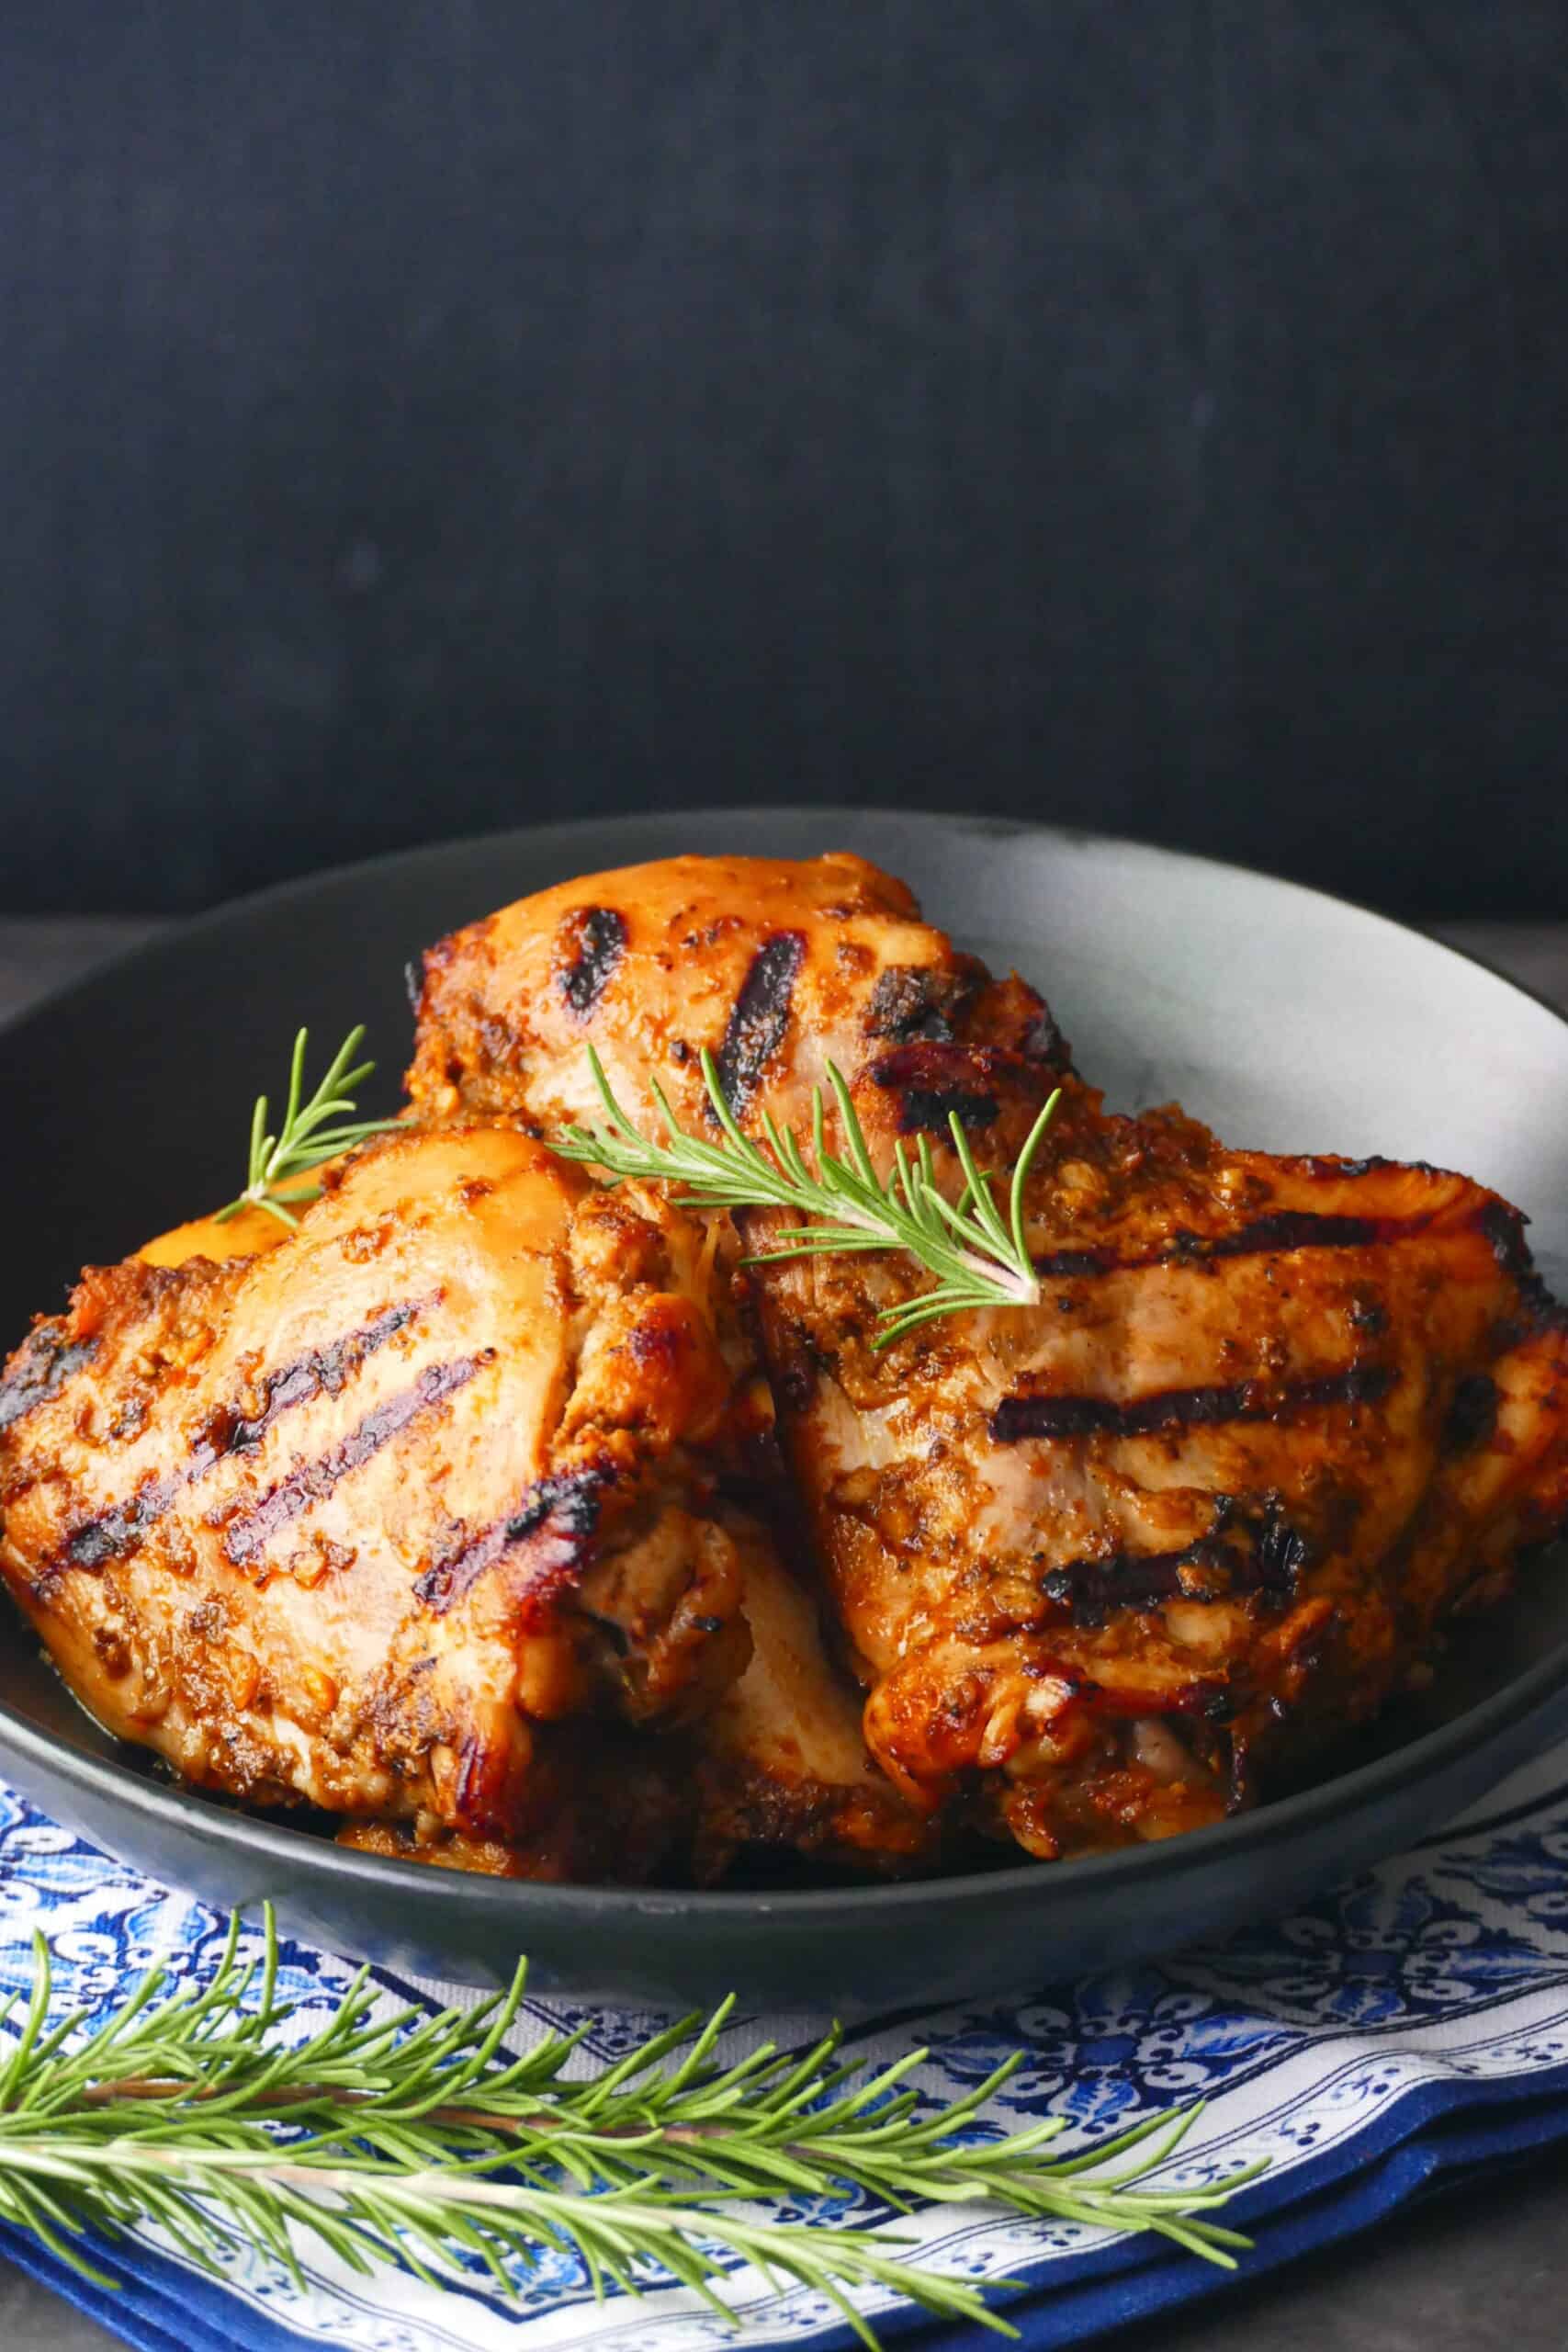 Grilled peri peri chicken pieces stacked in black plate on blue and white napkin with rosemary garnish